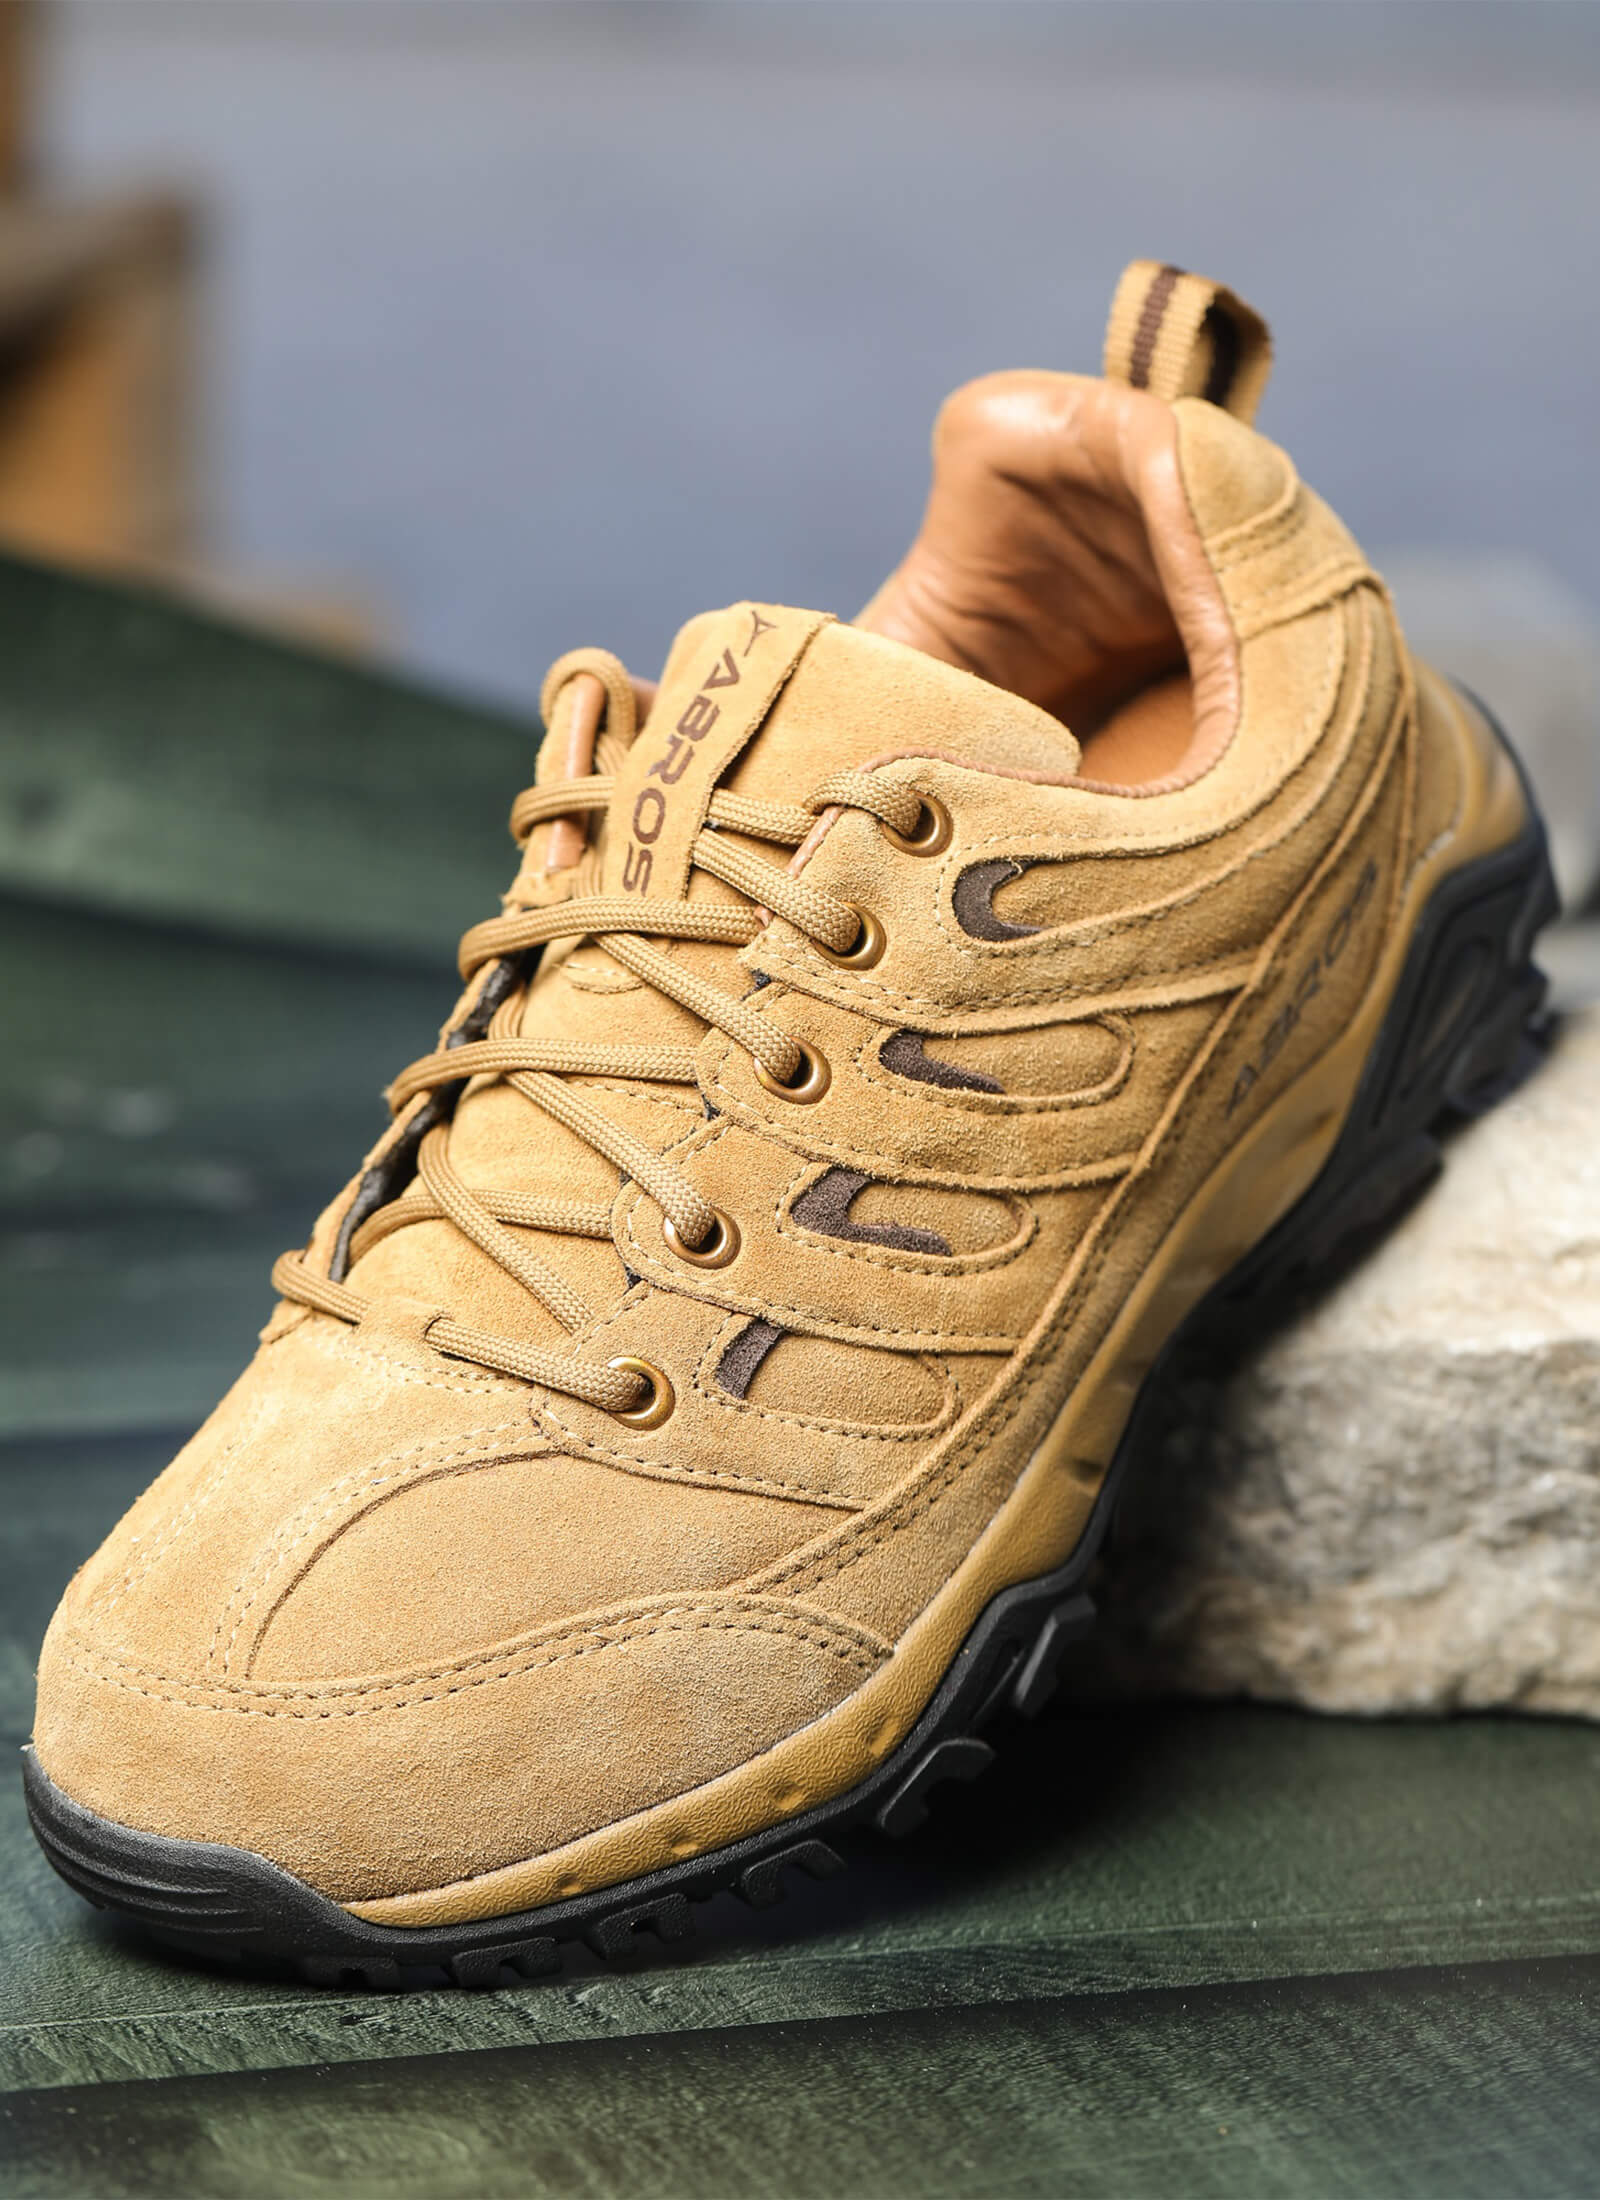 Lorenzo Outdoor Shoes for Men